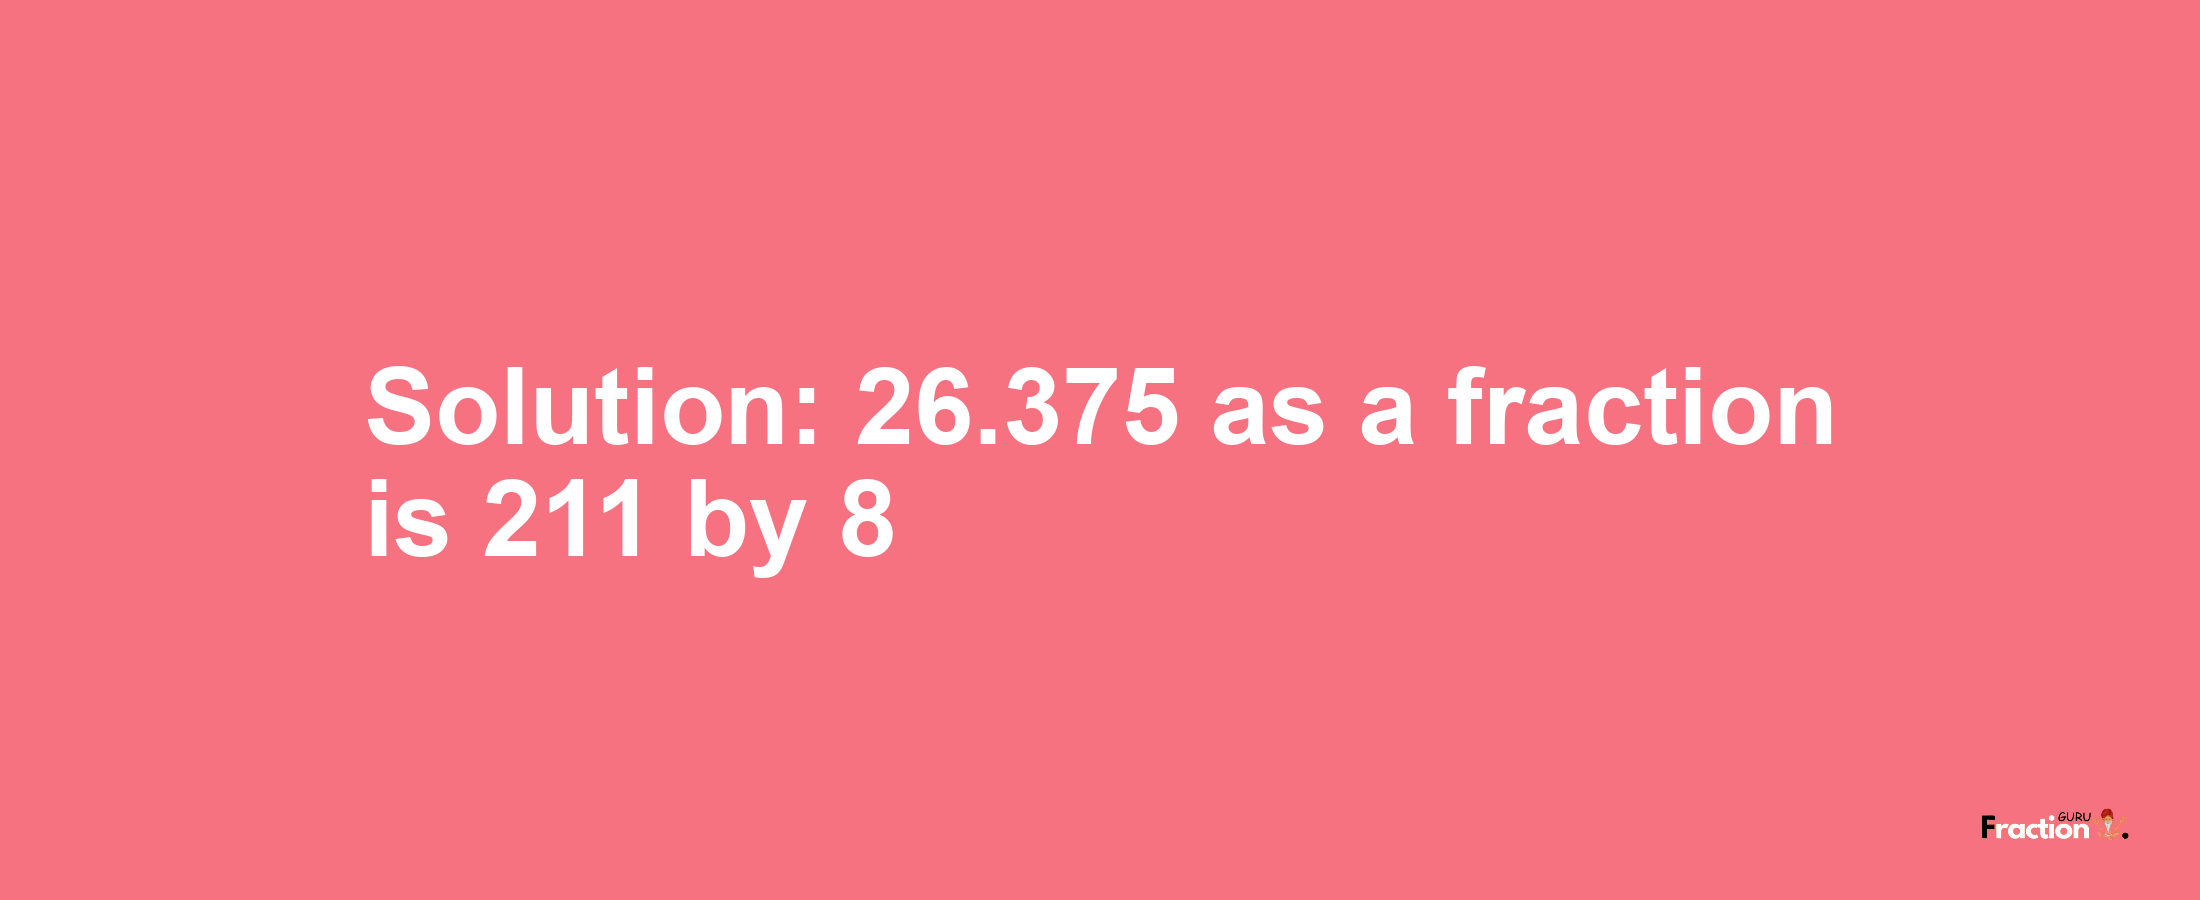 Solution:26.375 as a fraction is 211/8